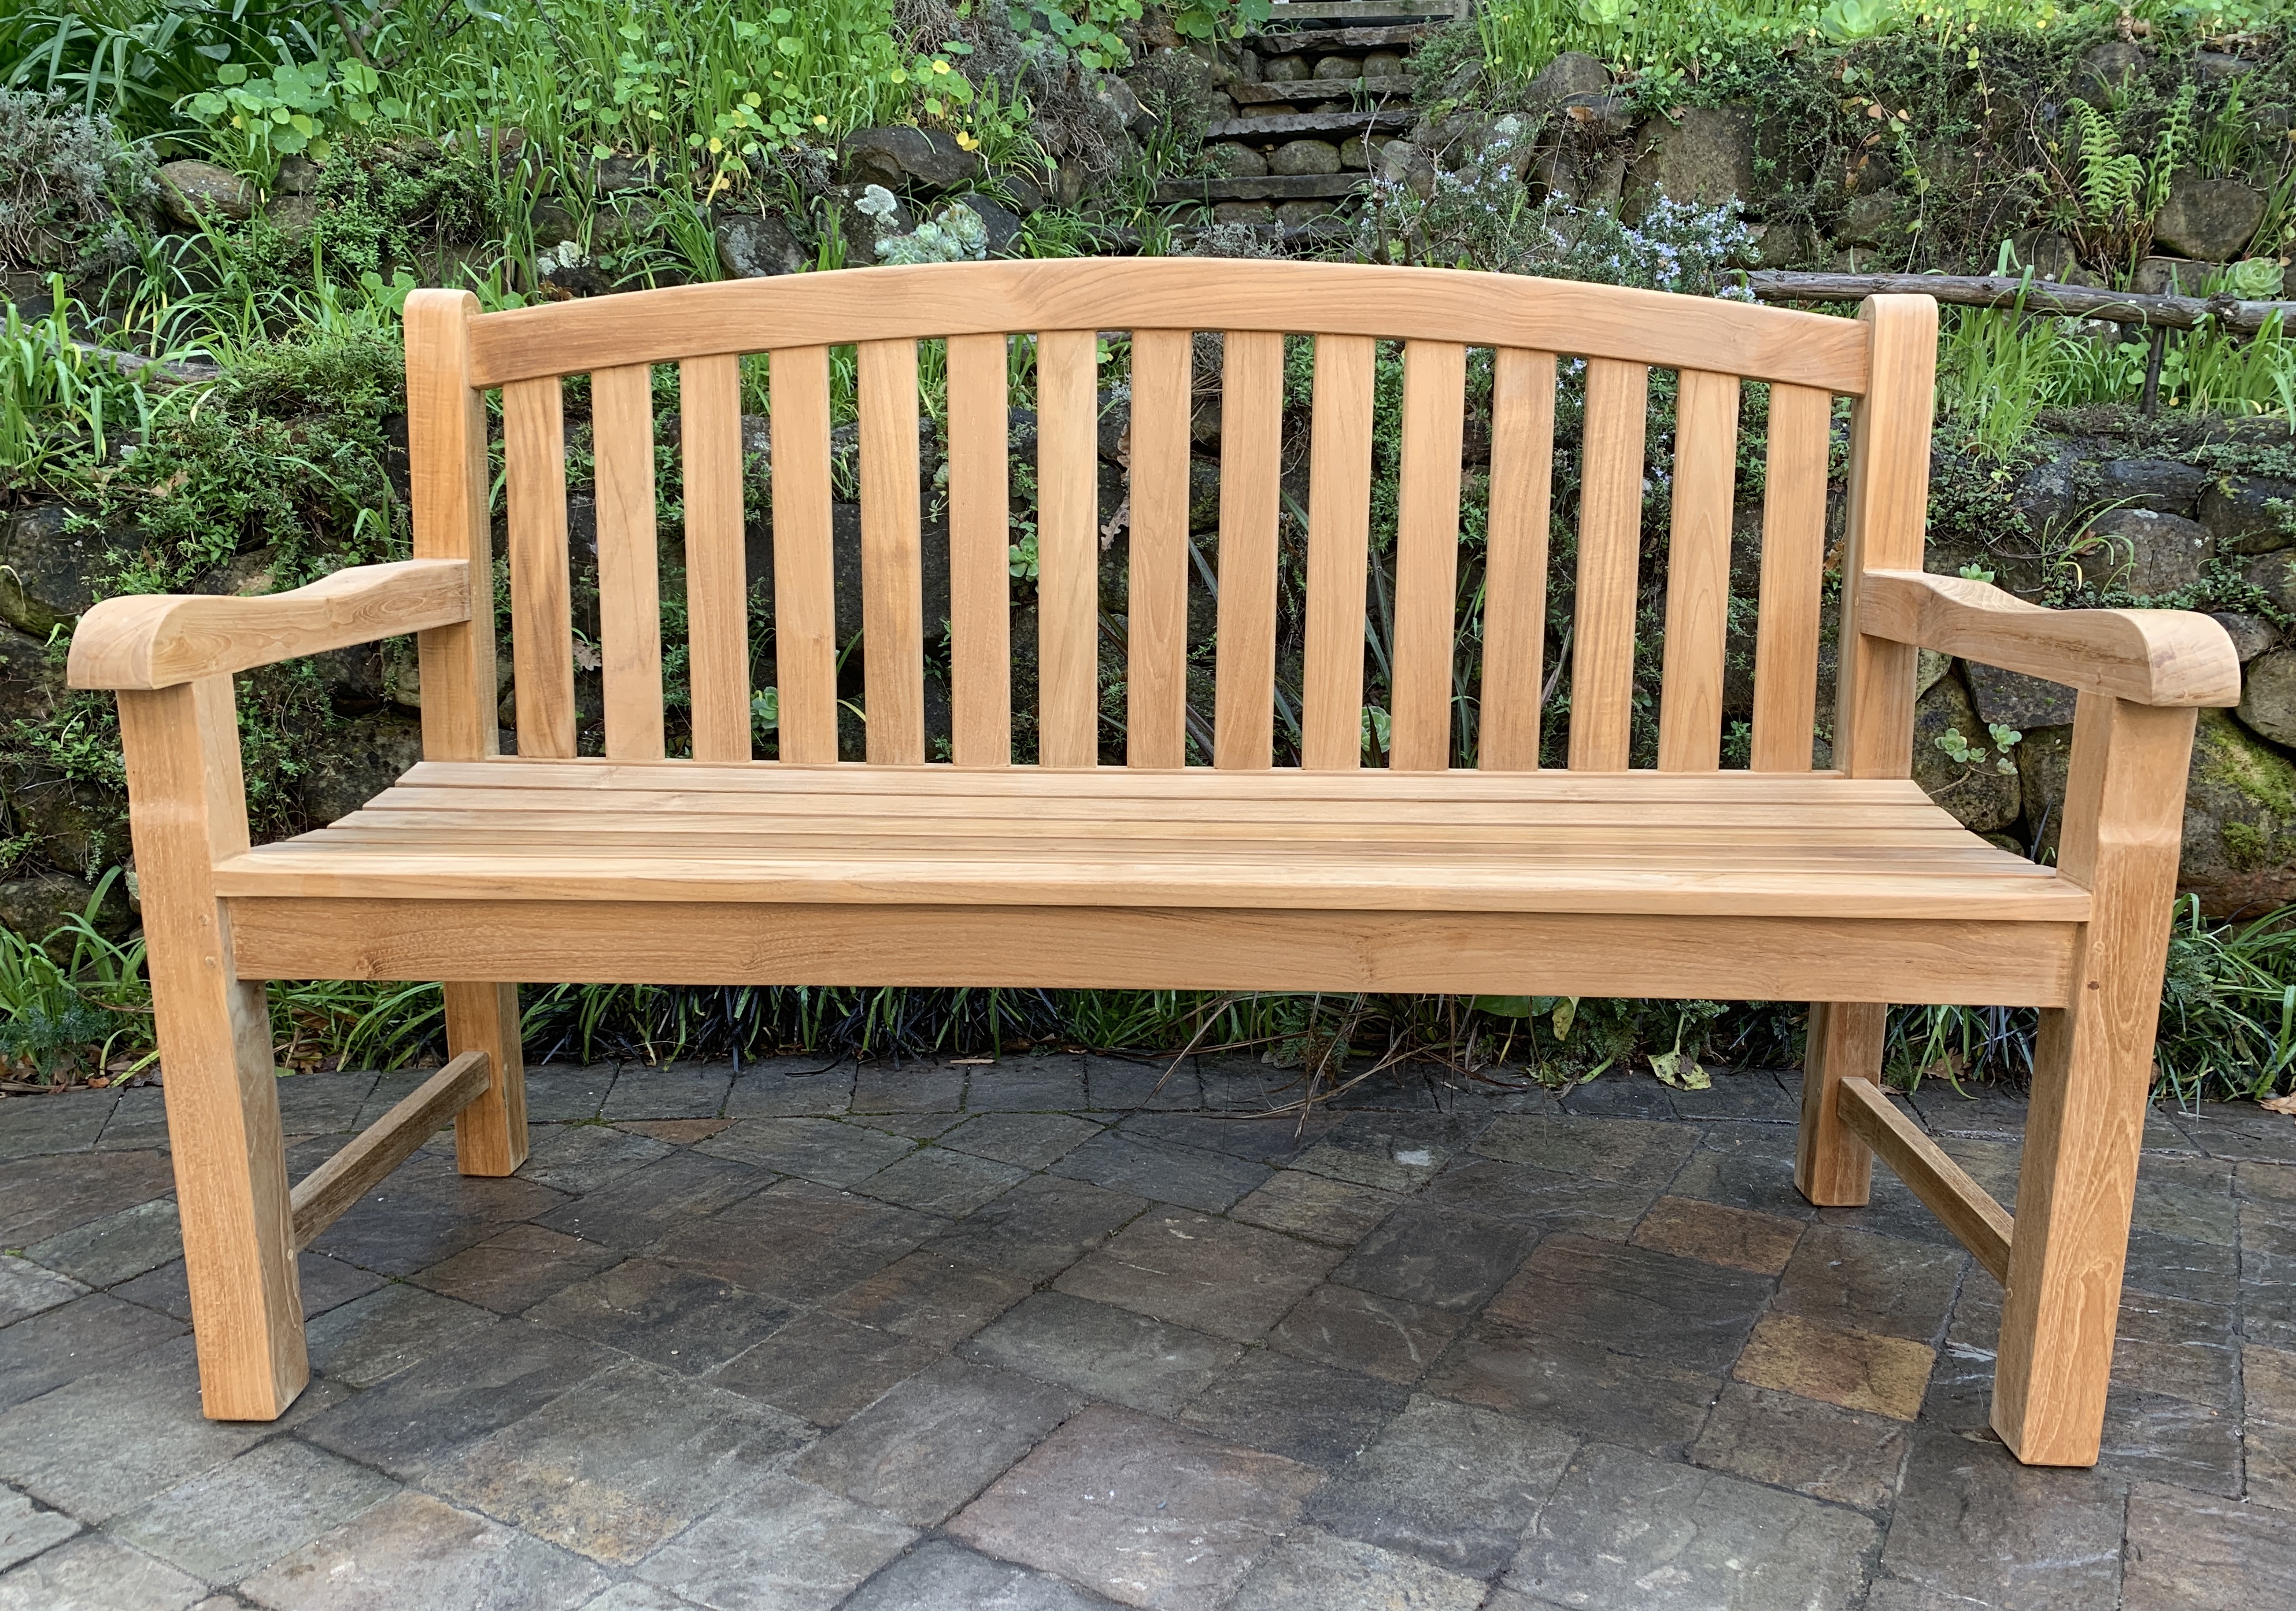 5′ Curved Top Bench